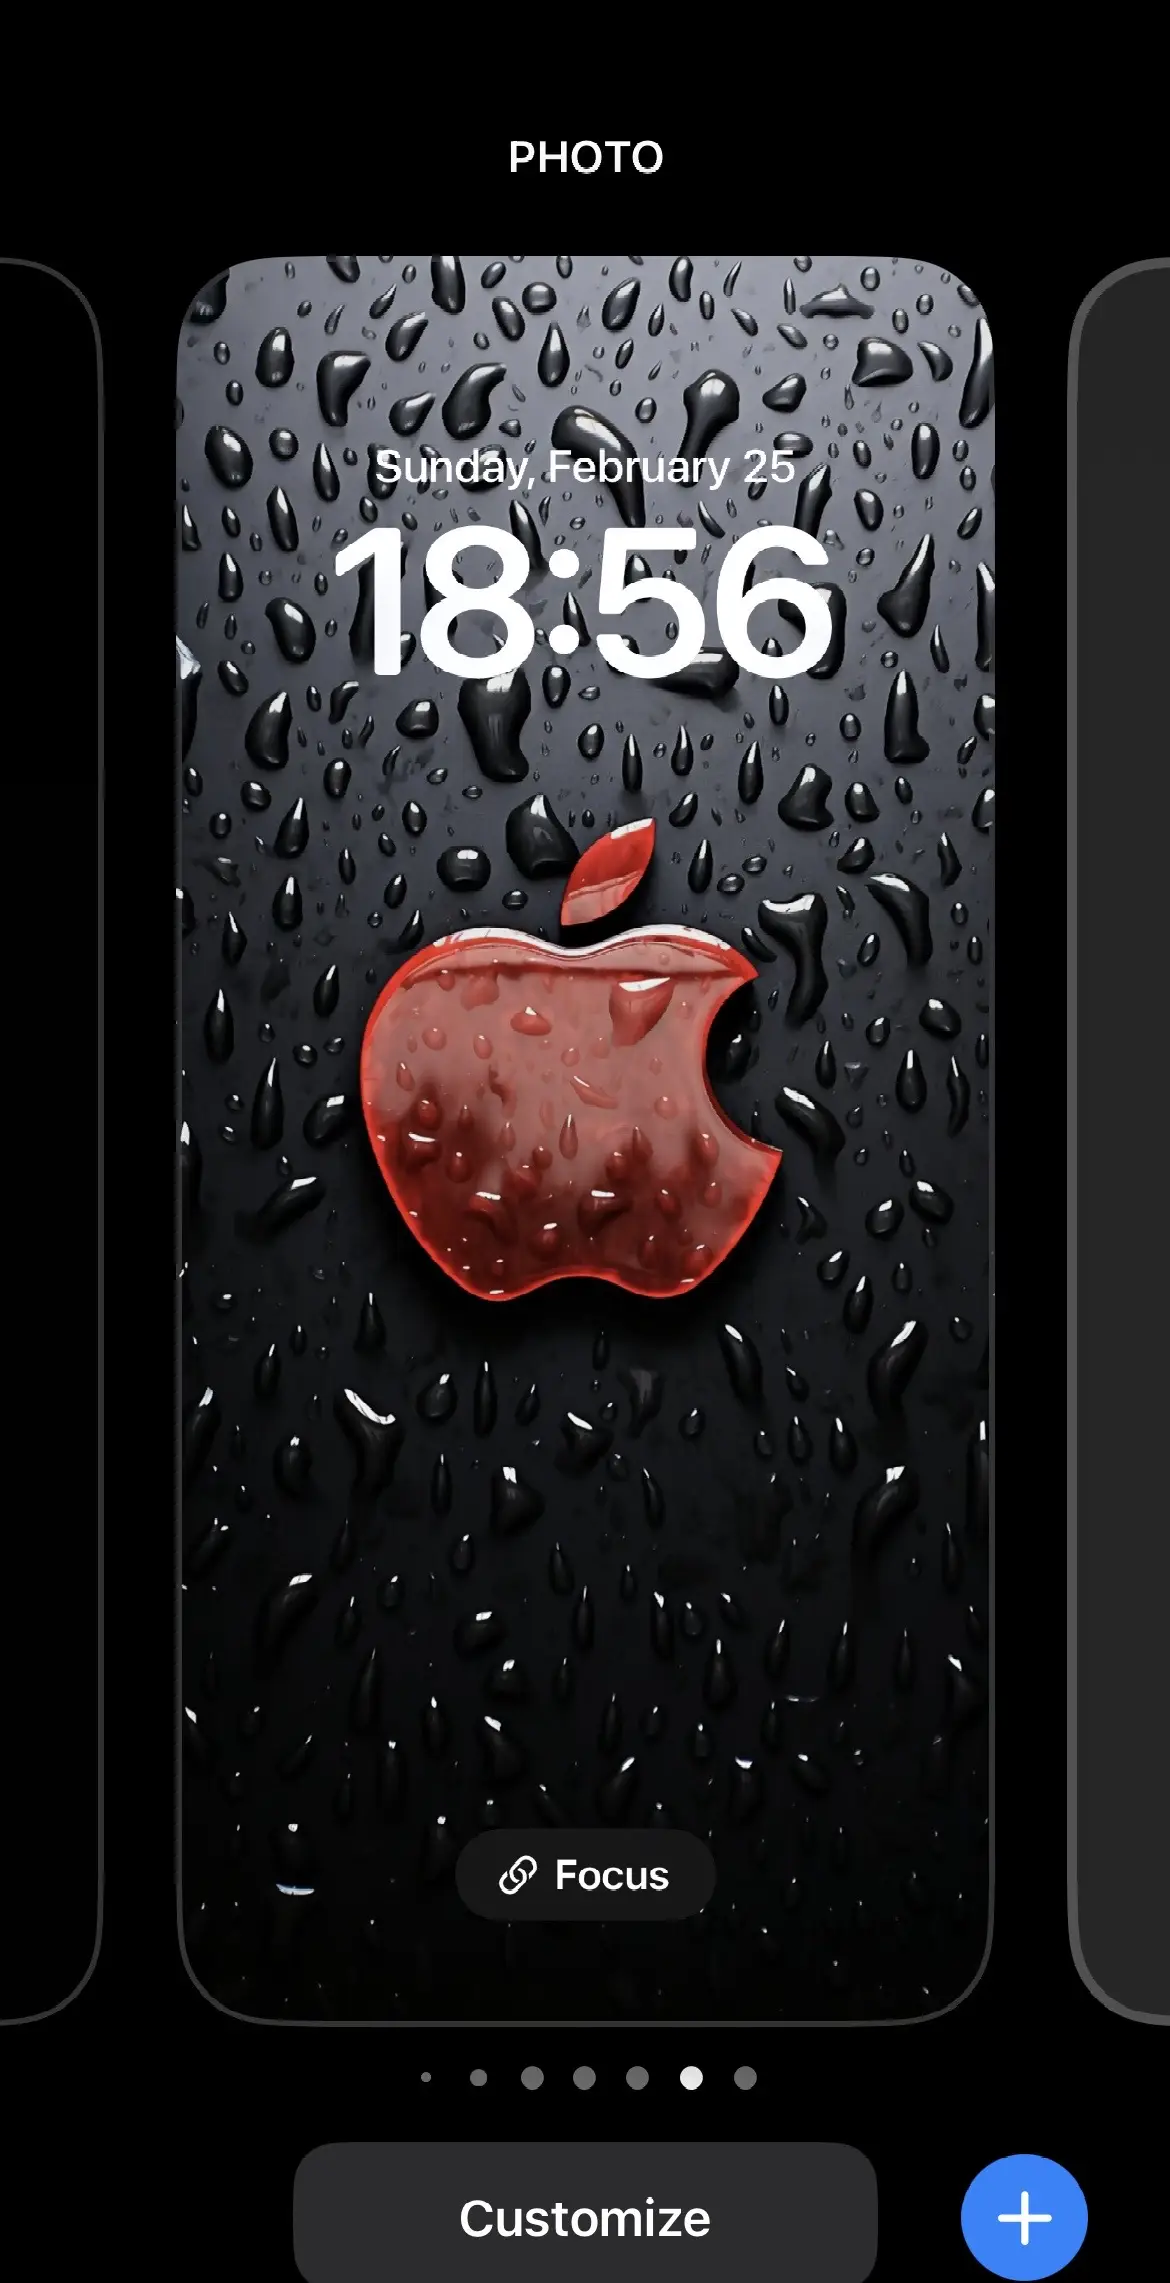 #wallpapers #mix #dark #apple #ios #donttouch #fyp #drill #newyork #usa #nyc #wallpaper #lirigraphx #lamborghini #pourtoi 